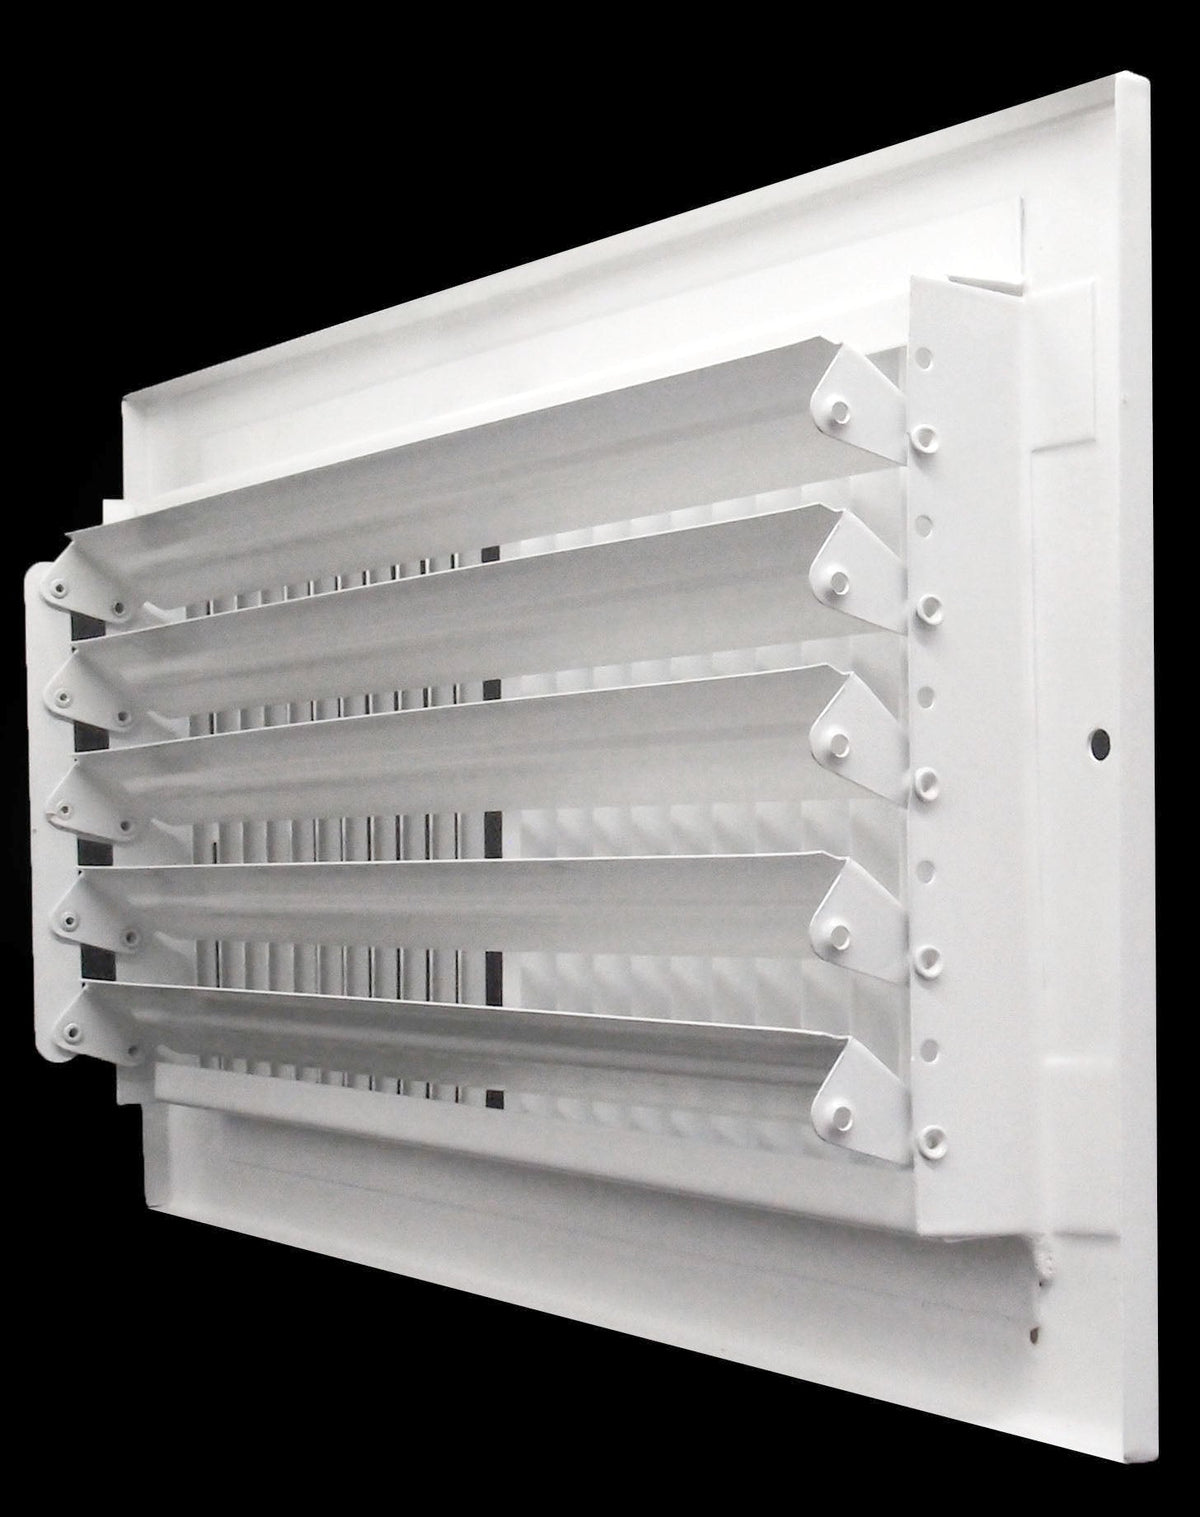 8&quot;w x 8&quot;h 2-Way AIR Supply Diffuser - Vent Duct Cover - Grille Register - Sidewall or Cieling - High Airflow - White